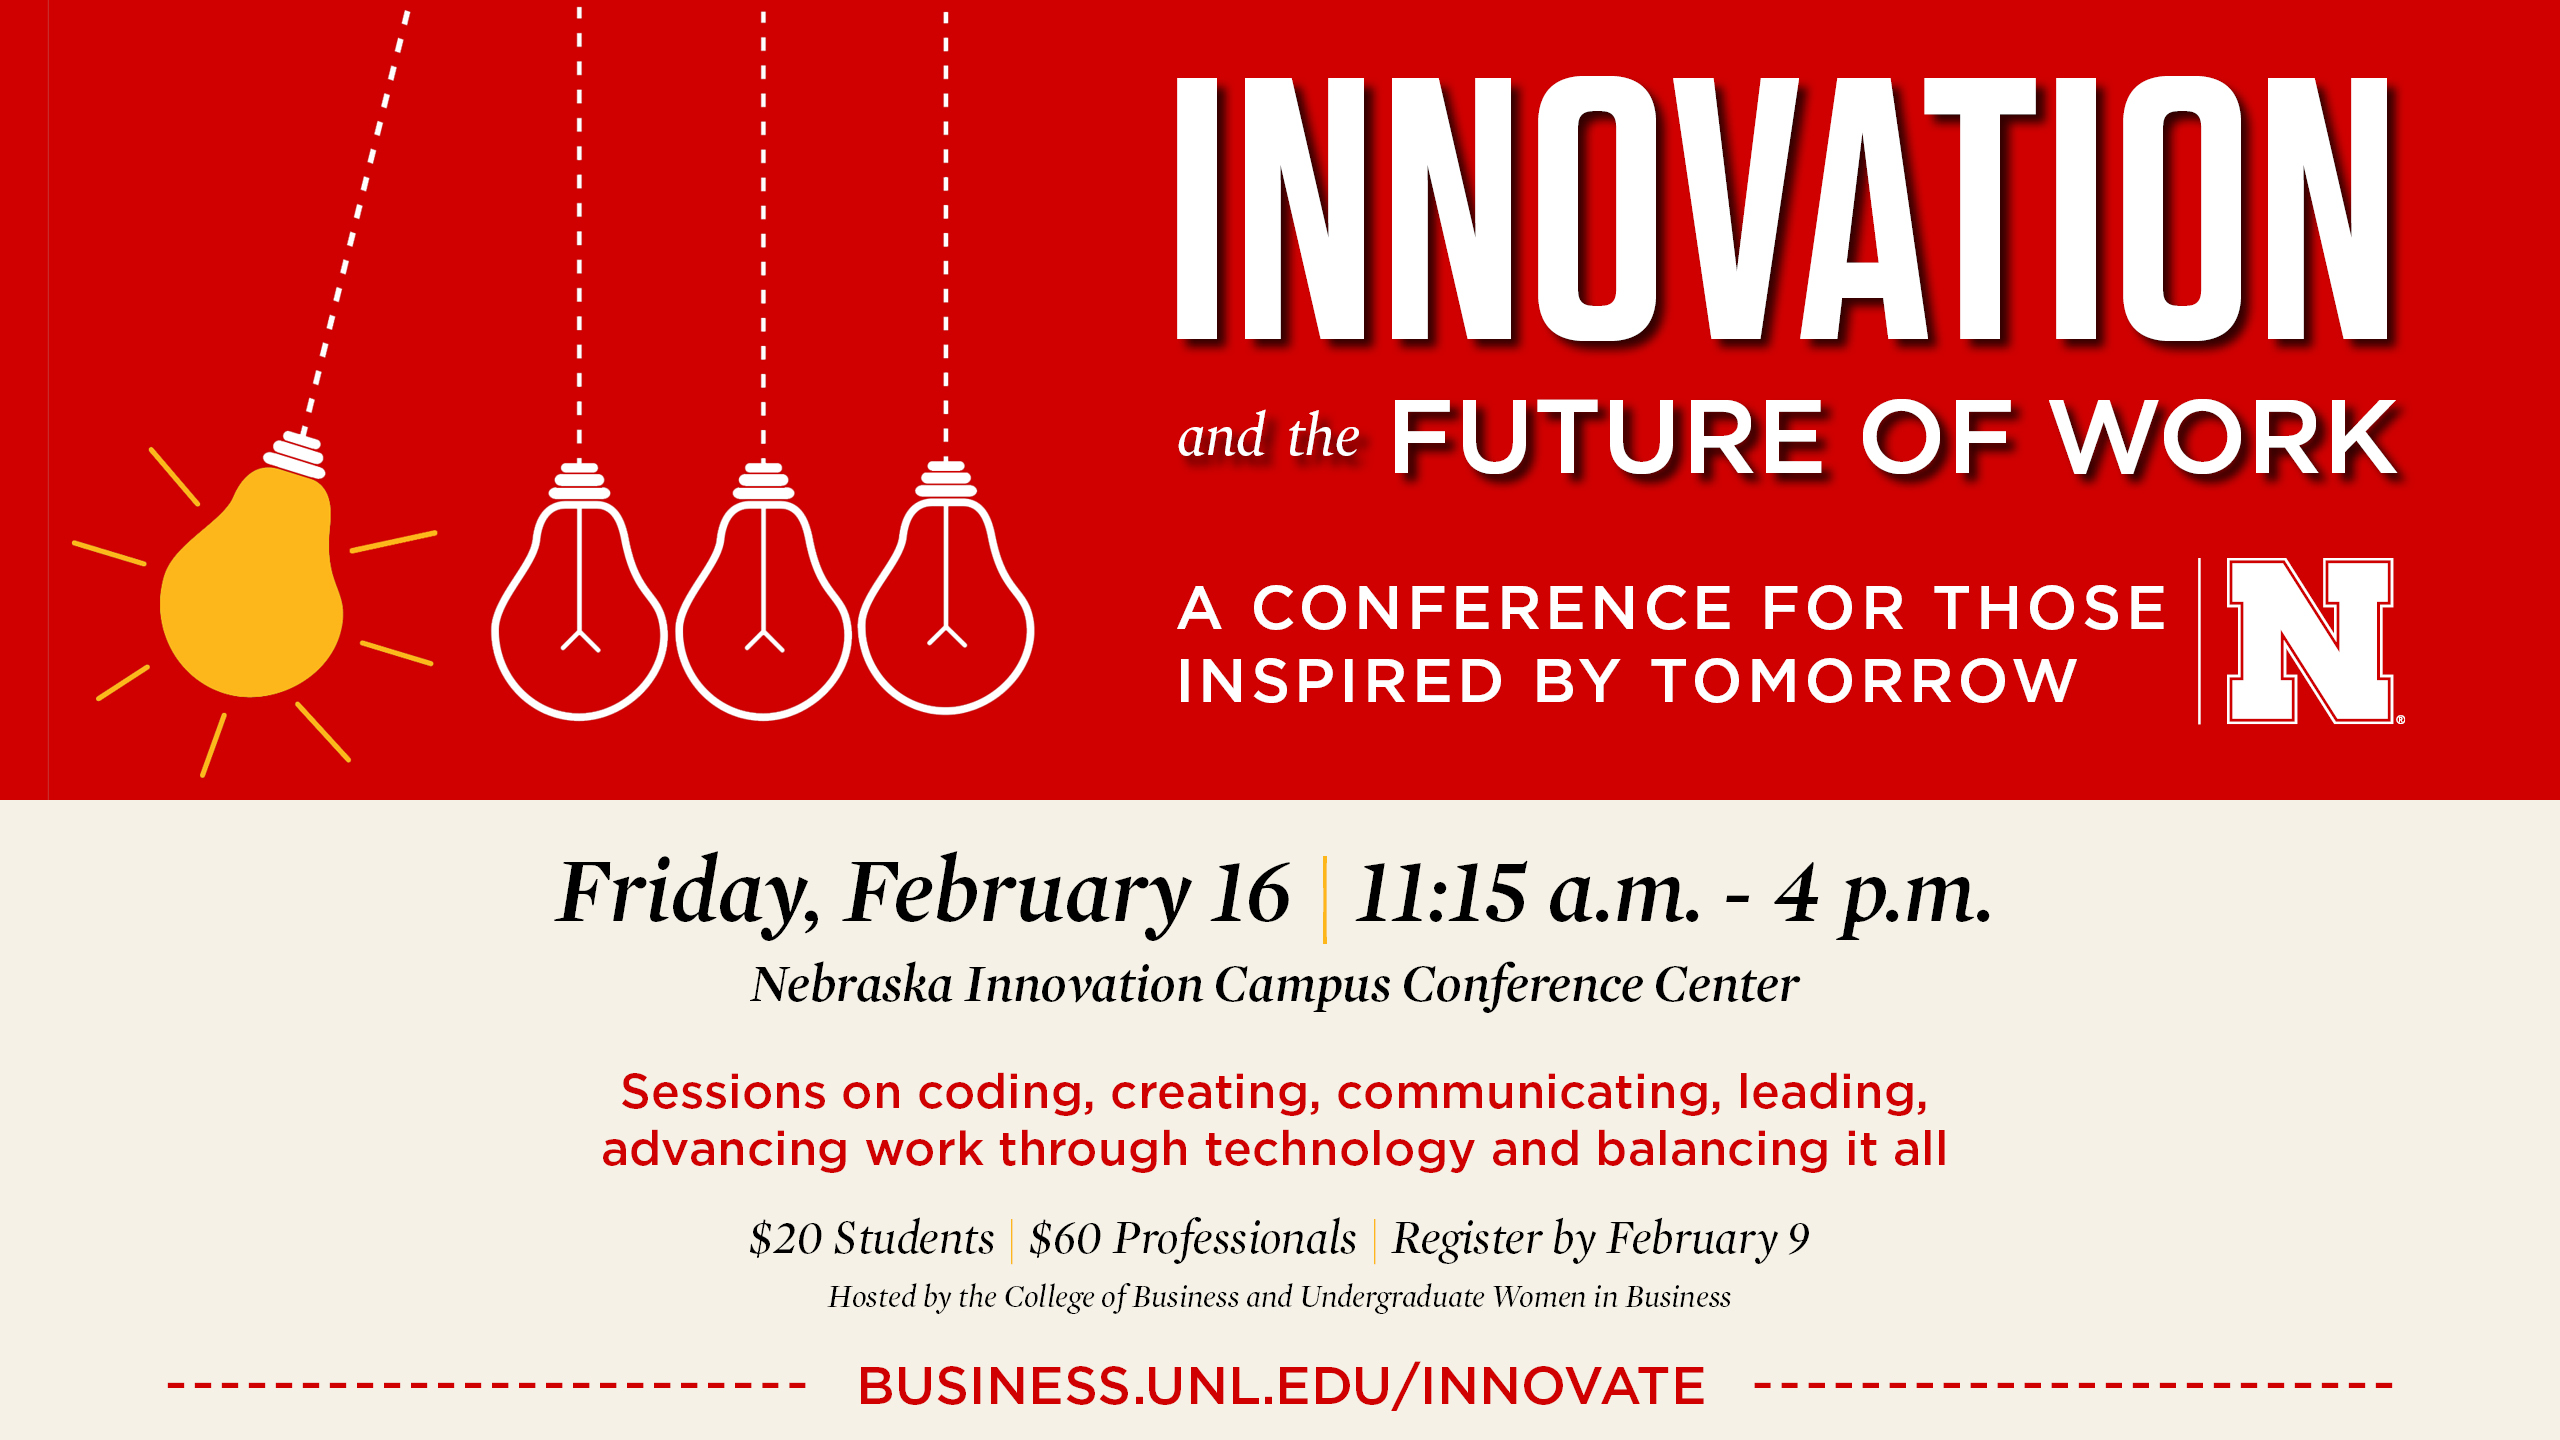 Innovation and the Future of Work Conference Announce University of